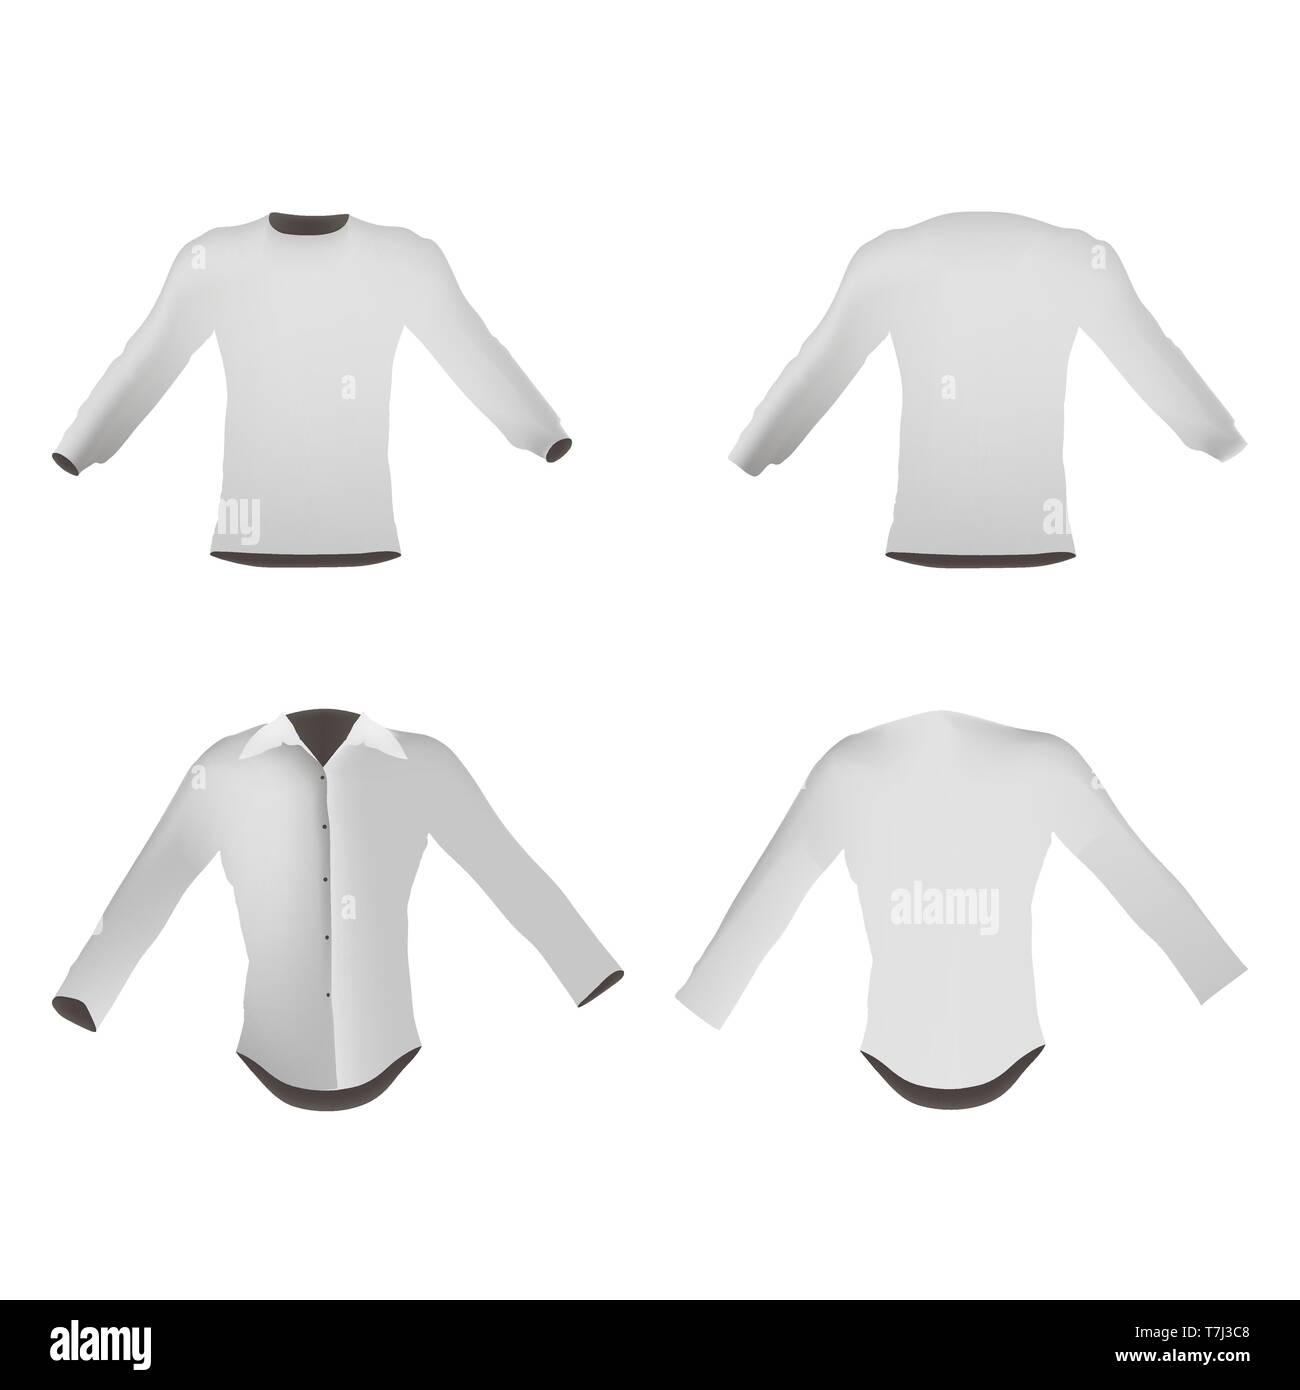 Premium Vector  White blank t-shirt front and back views realistic sports  clothing uniform template